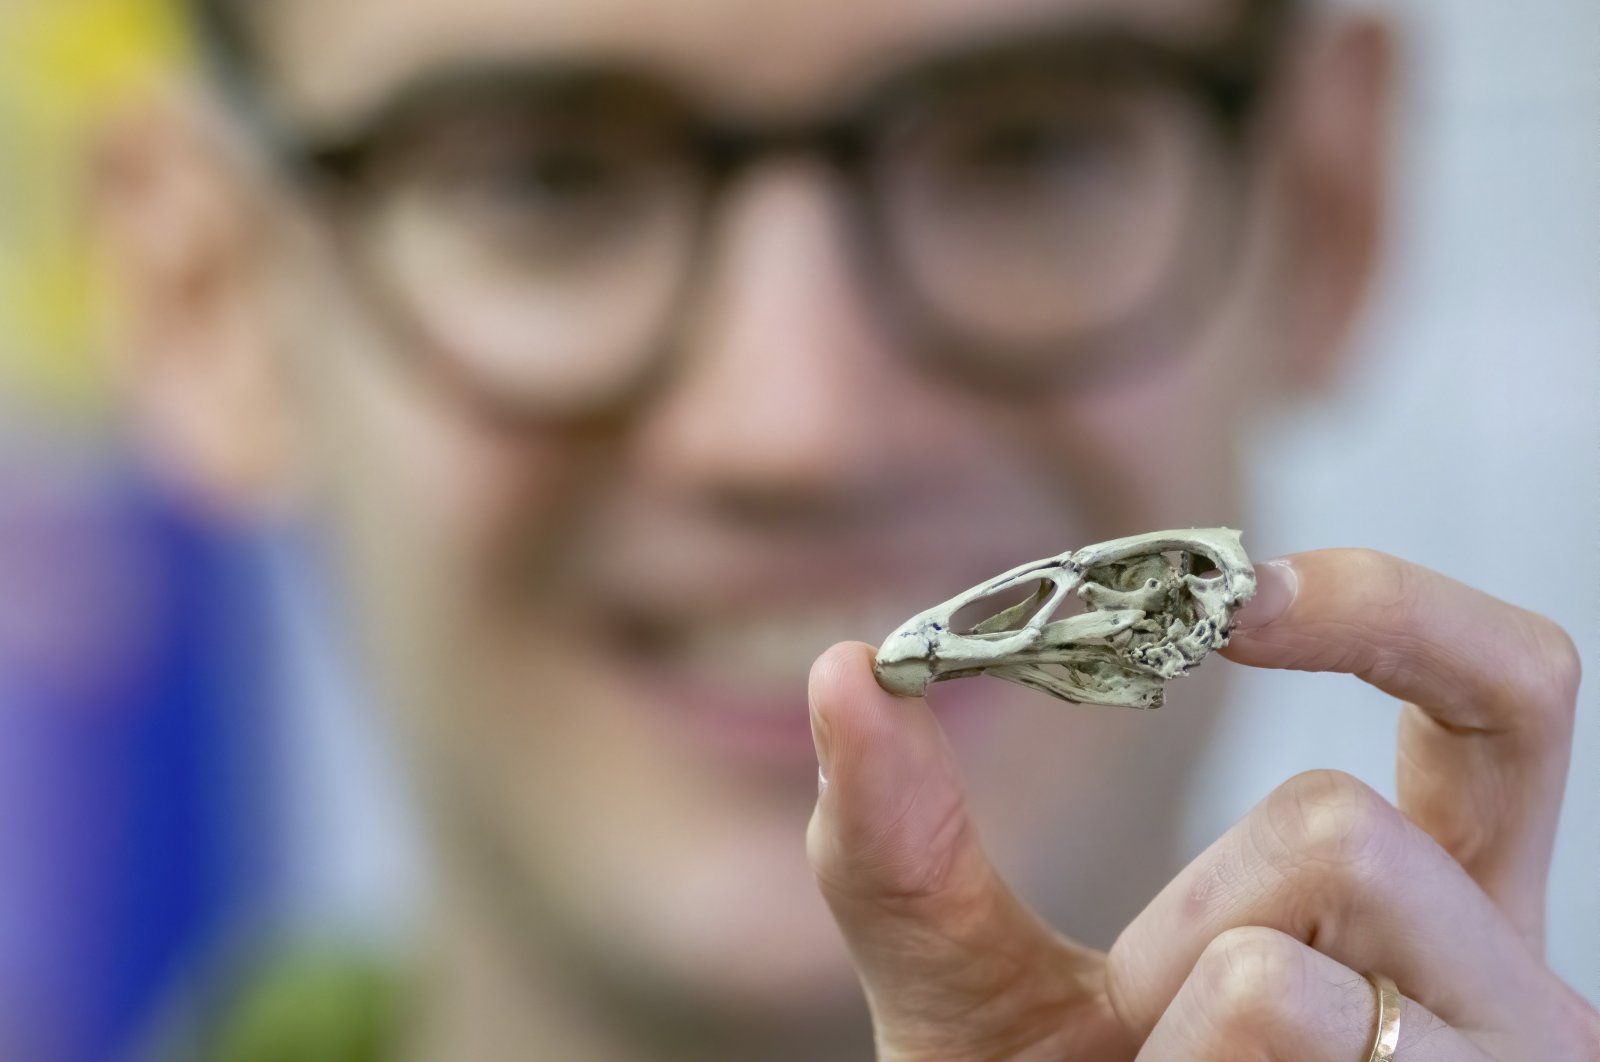 This March 2020 photo provided by researcher Daniel J. Field shows him holding a life-size 3D print of the Asteriornis maastrichtensis "Wonderchicken" skull in Cambridge, England, Wednesday, March 18, 2020. (AP Photo)